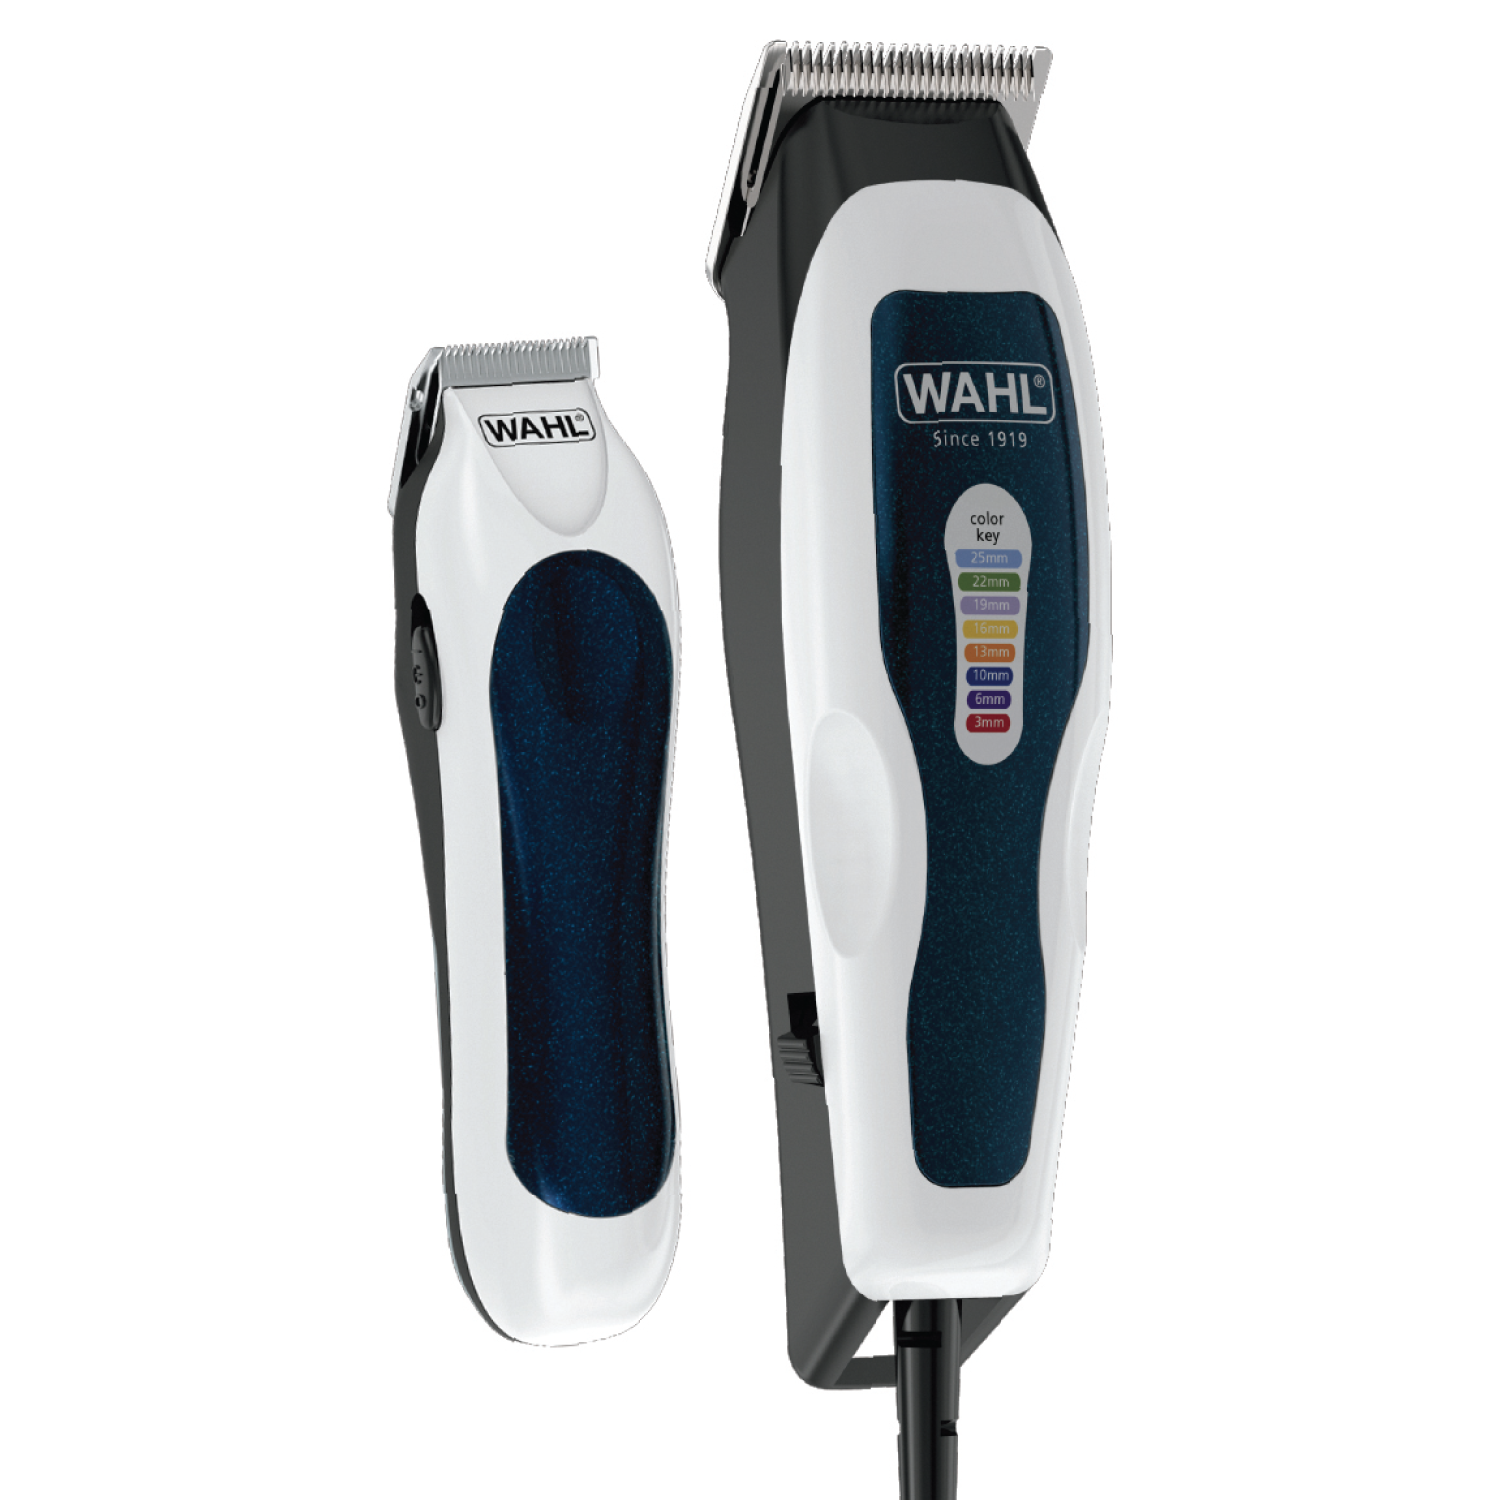 Wahl - Color Pro Combo Hair Clipper (1395‐0465)